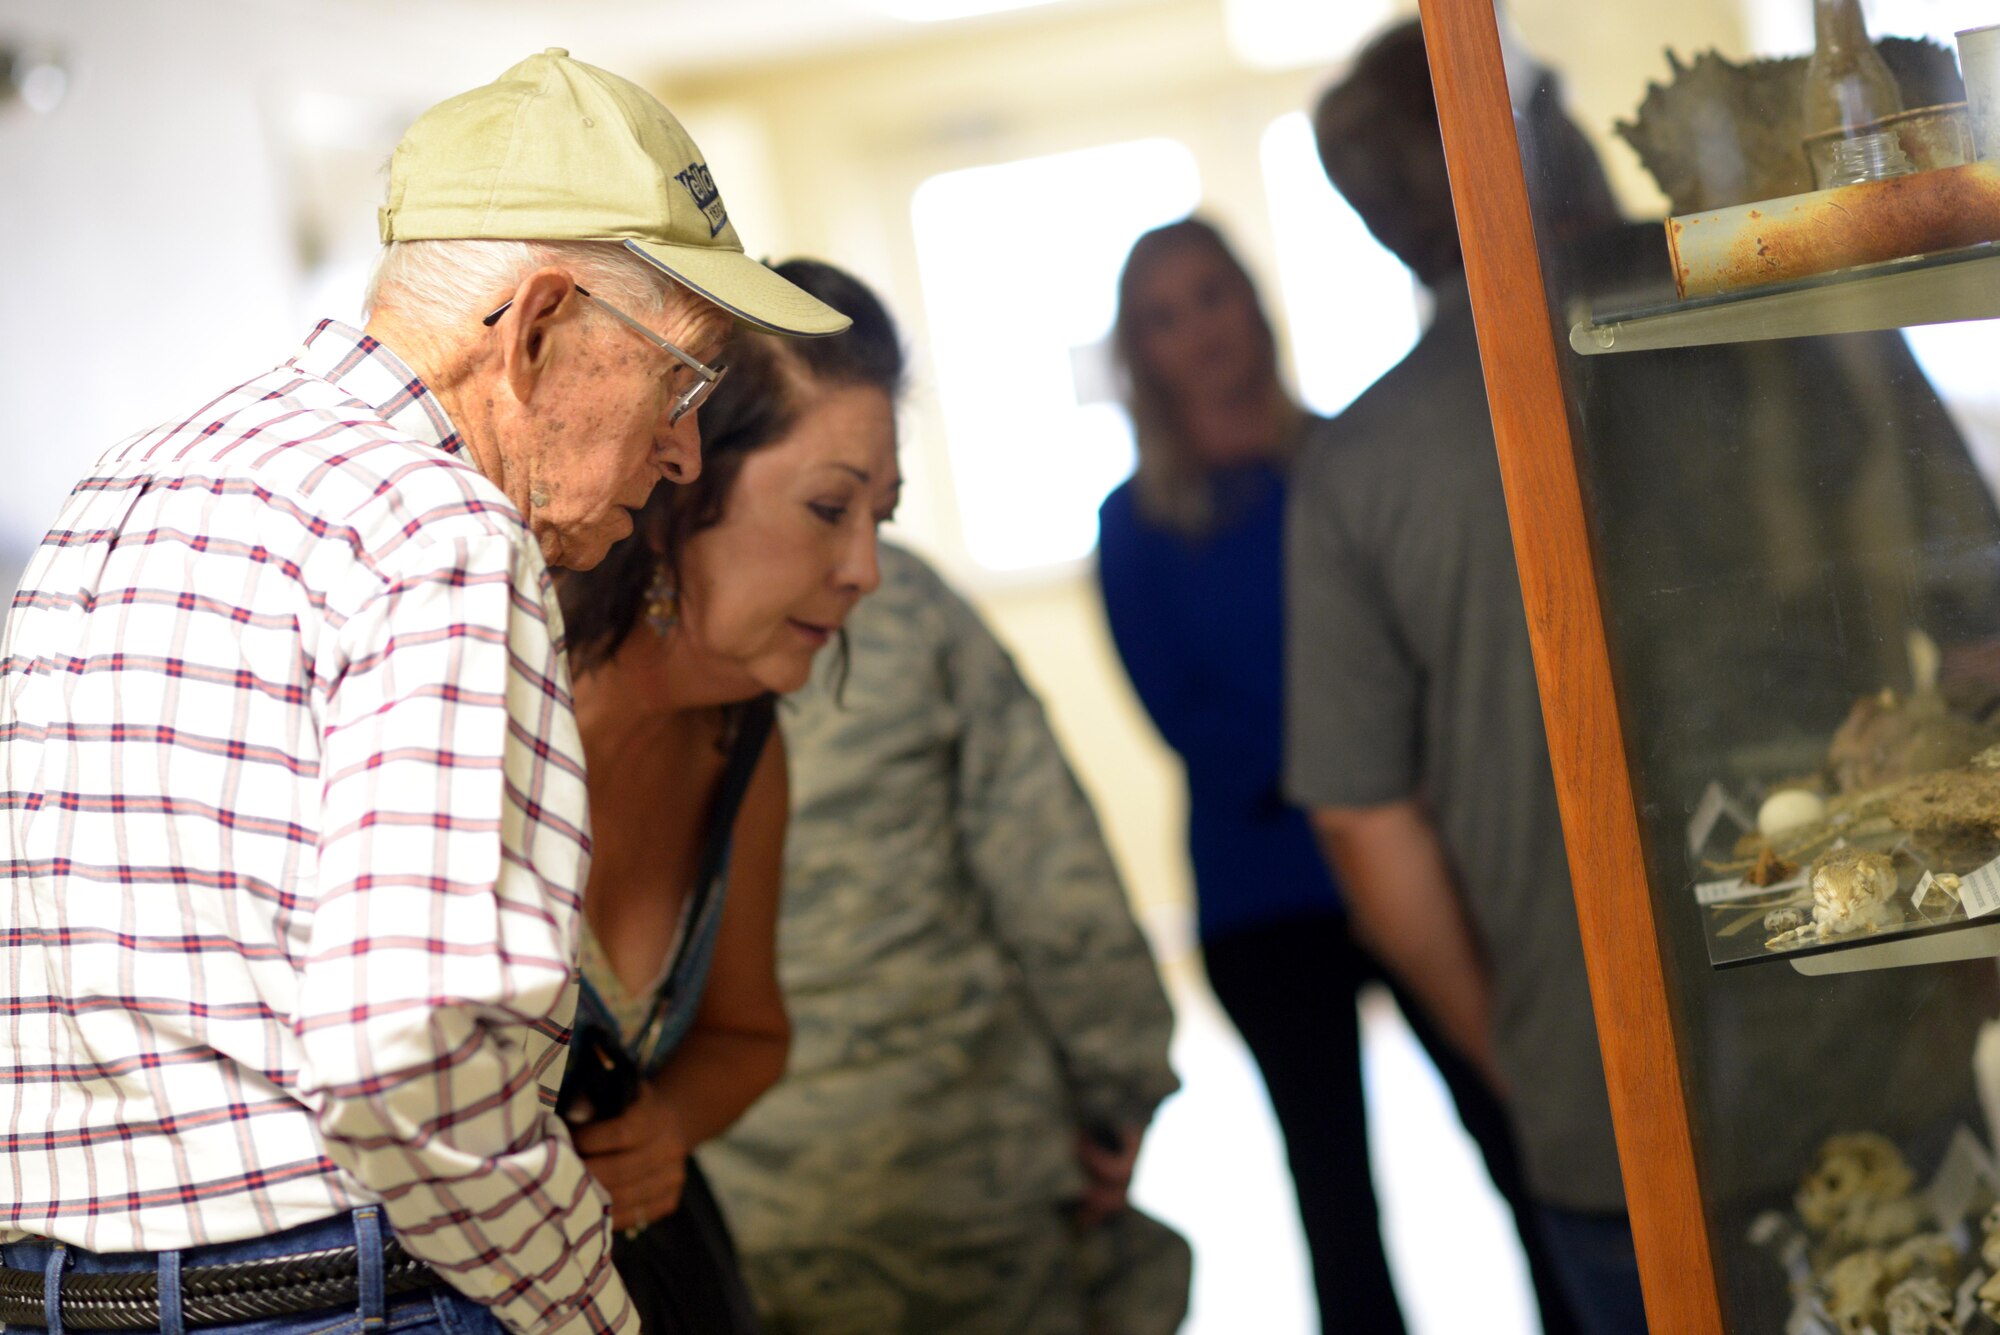 Manuel Martinez, a World War II veteran, and his family view artifacts from Gila Bend Air Force Auxiliary Field during a tour of the 56th Range Management Office at Luke Air Force Base, Ariz., Oct. 2, 2017. Martinez spent the morning reminiscing about his time at the base decades ago and learned about how the Air Force runs today. (U.S. Air Force